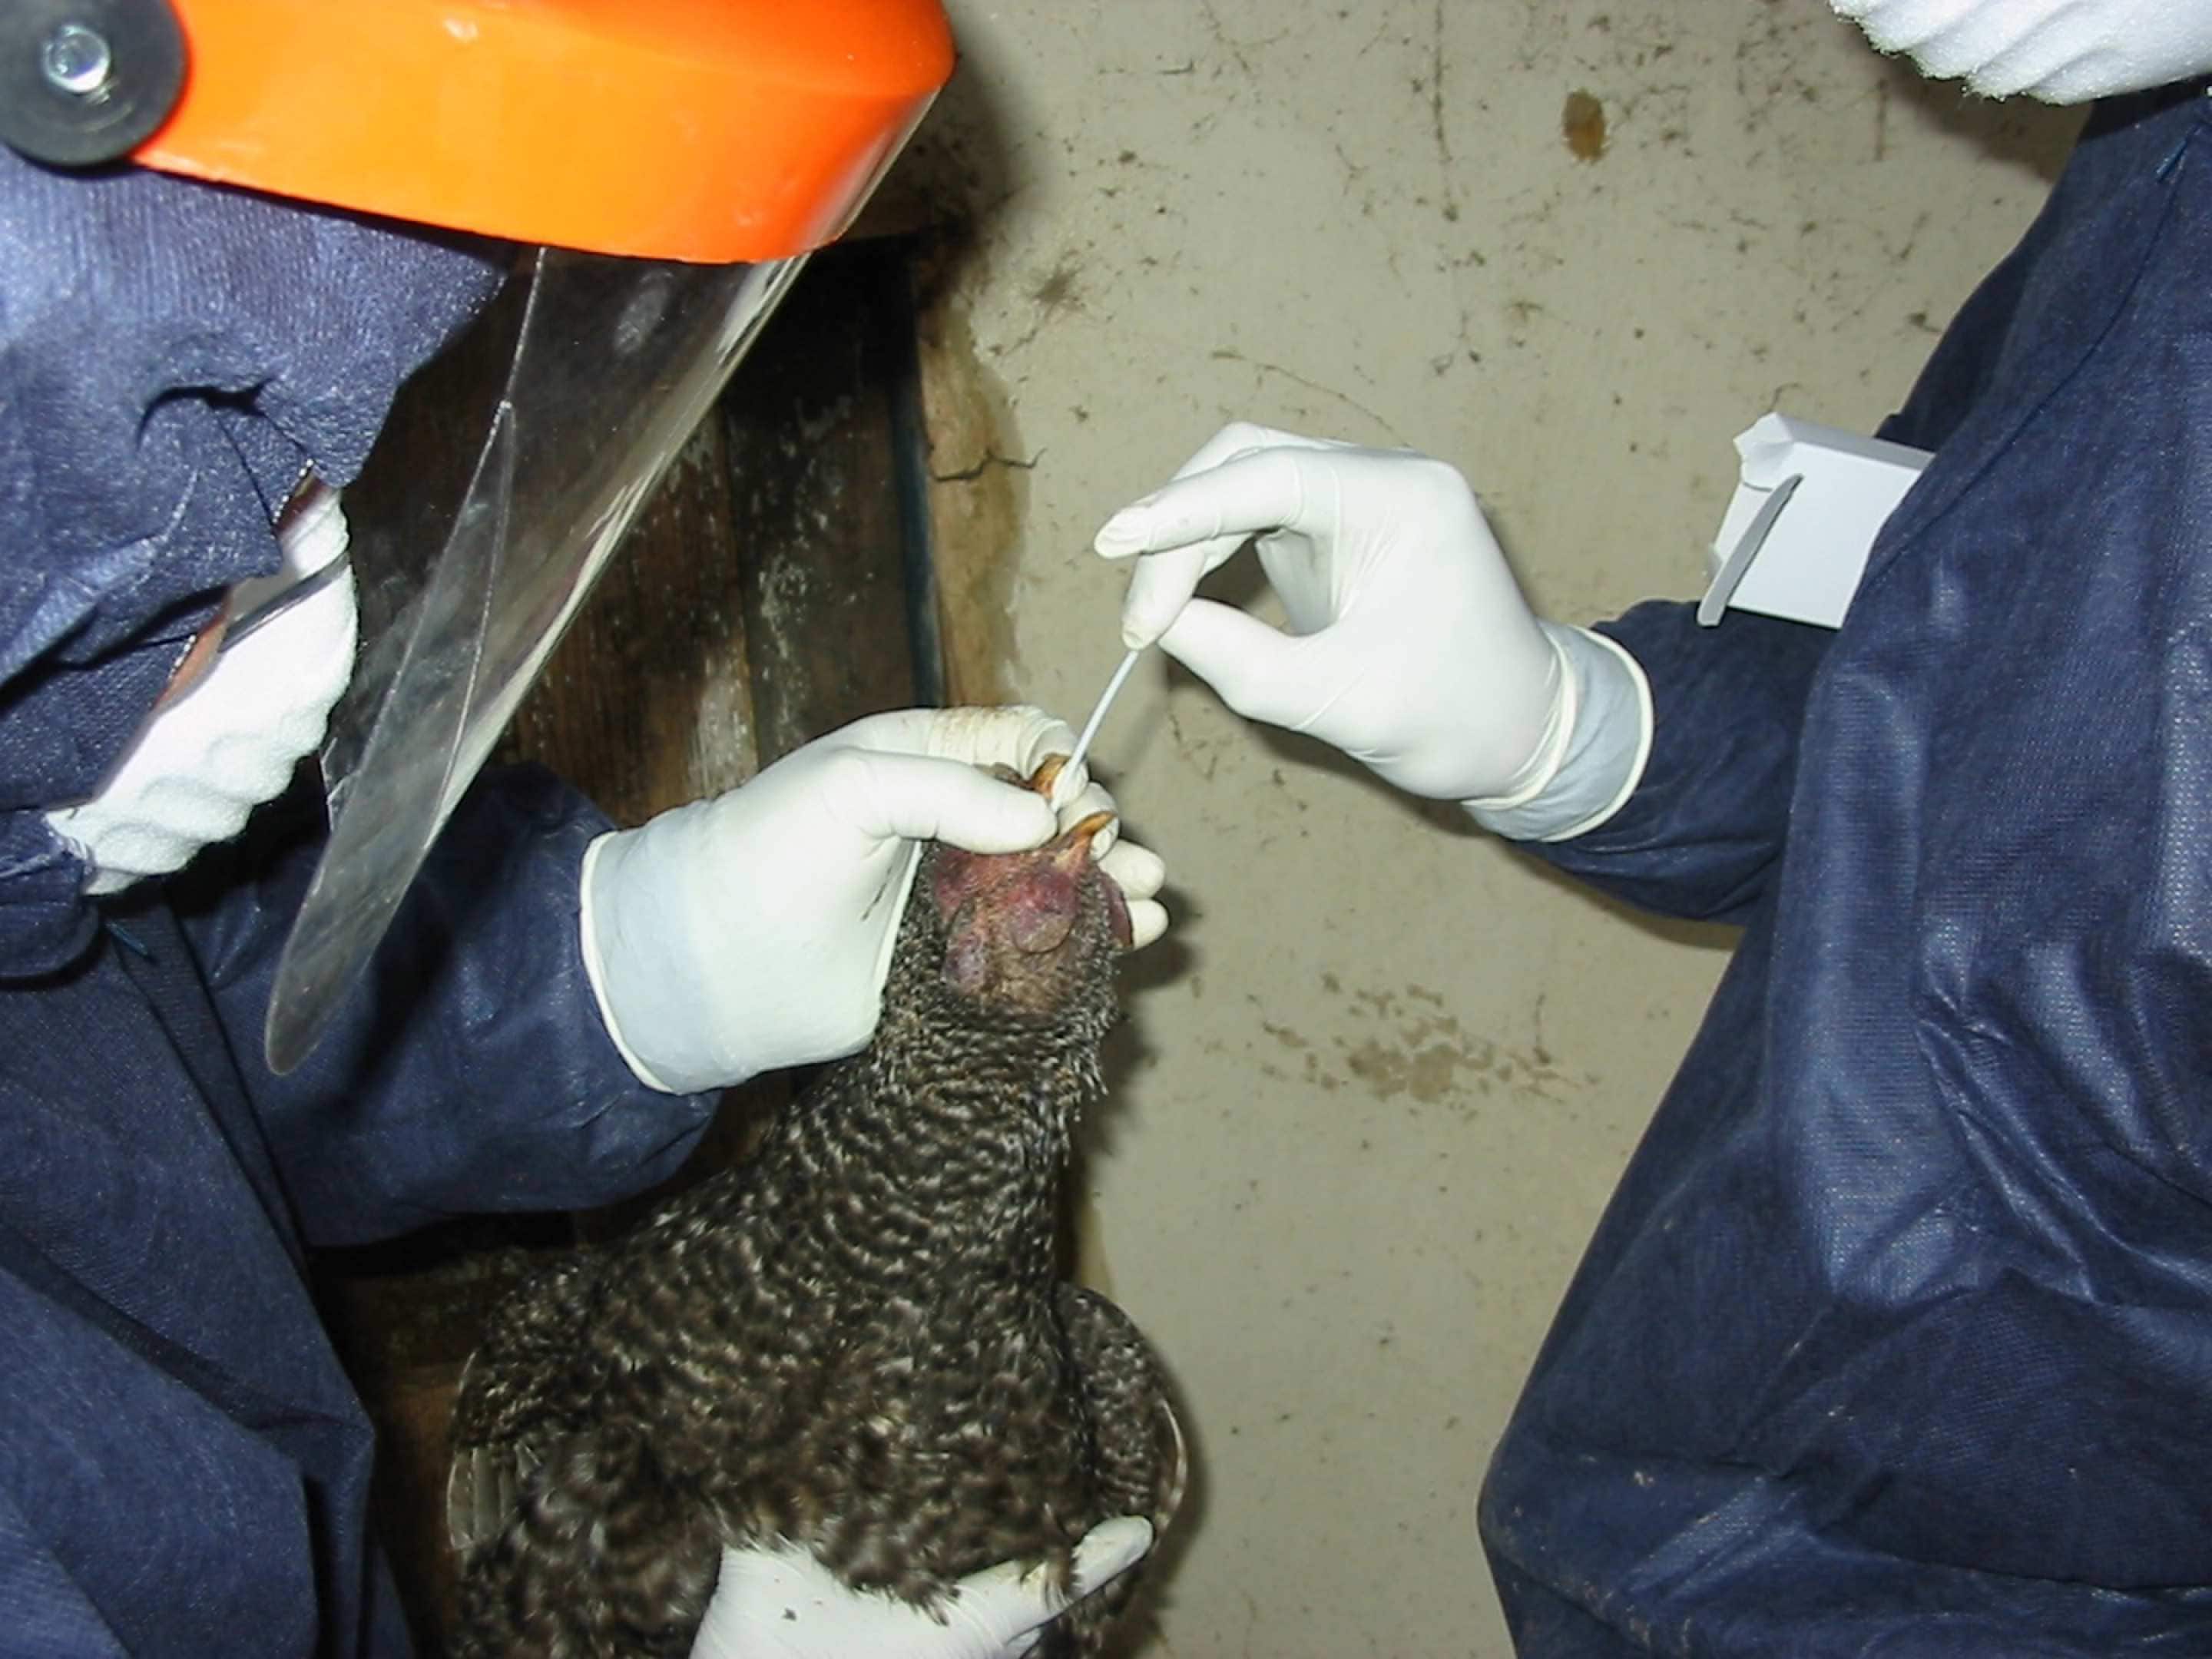 Testing poultry for avian influenza in Romania [Credit: Michael Ward]